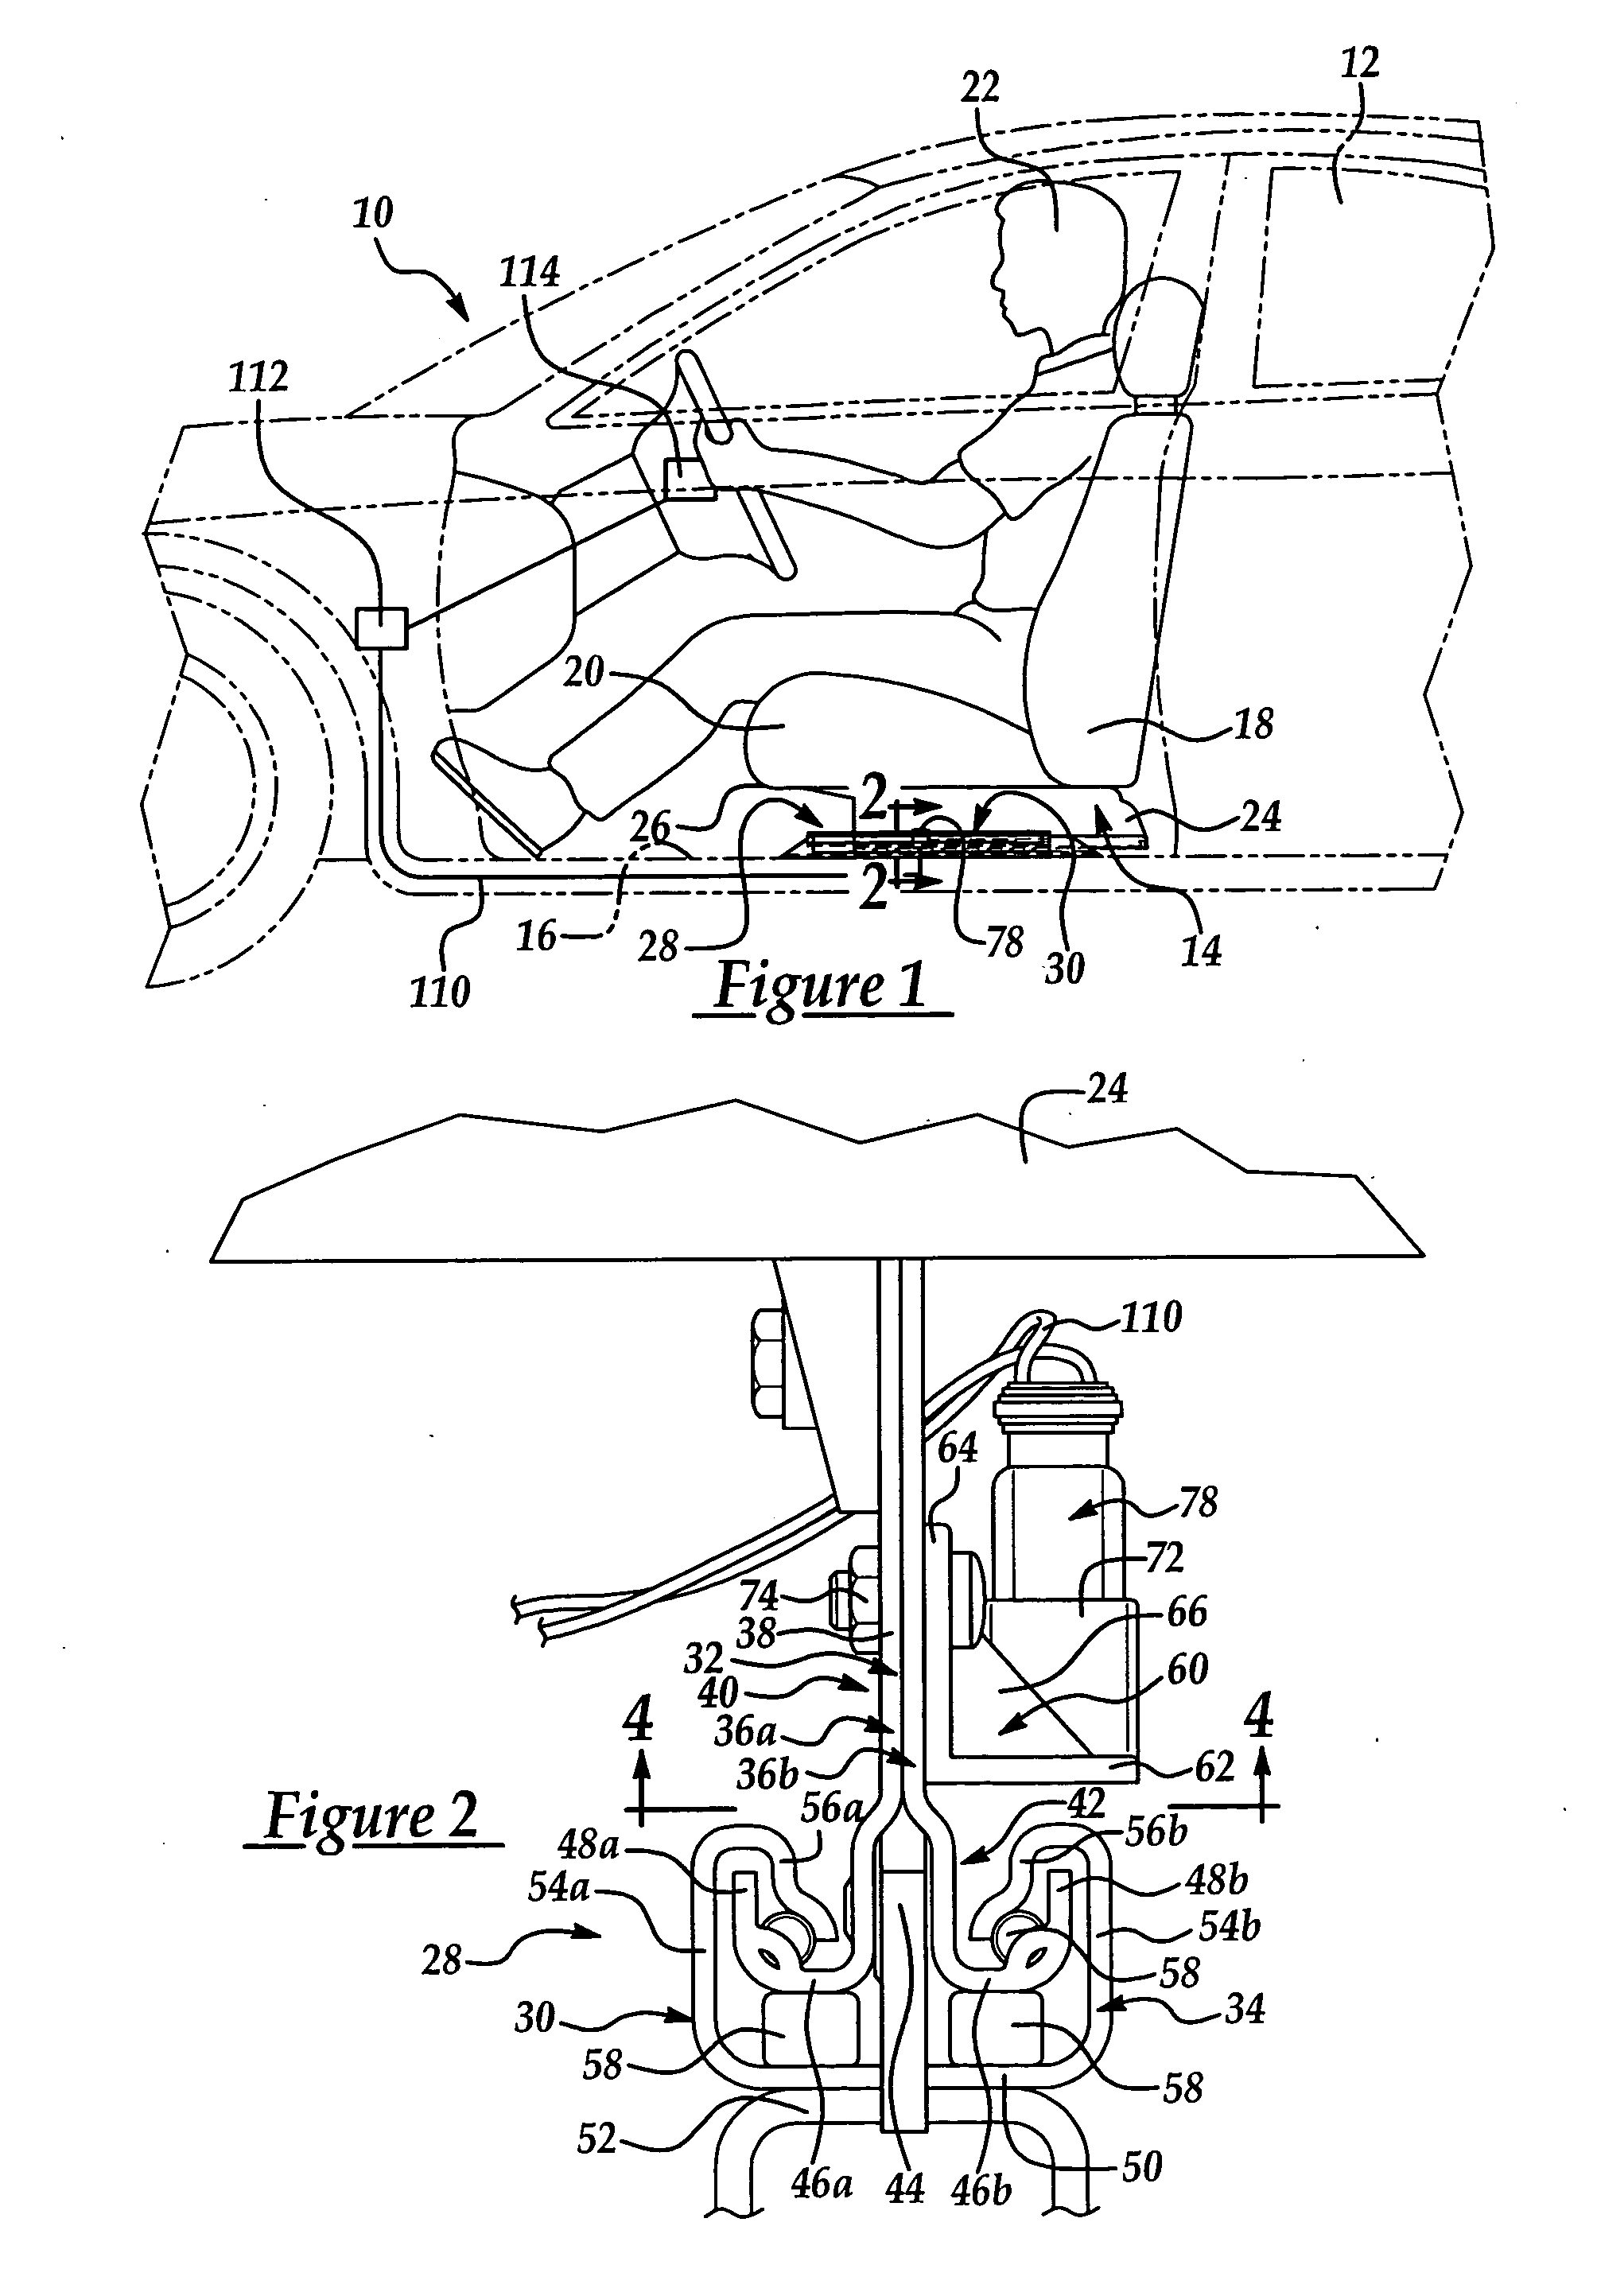 Vehicle seat assembly having a field effect sensor for detecting seat position